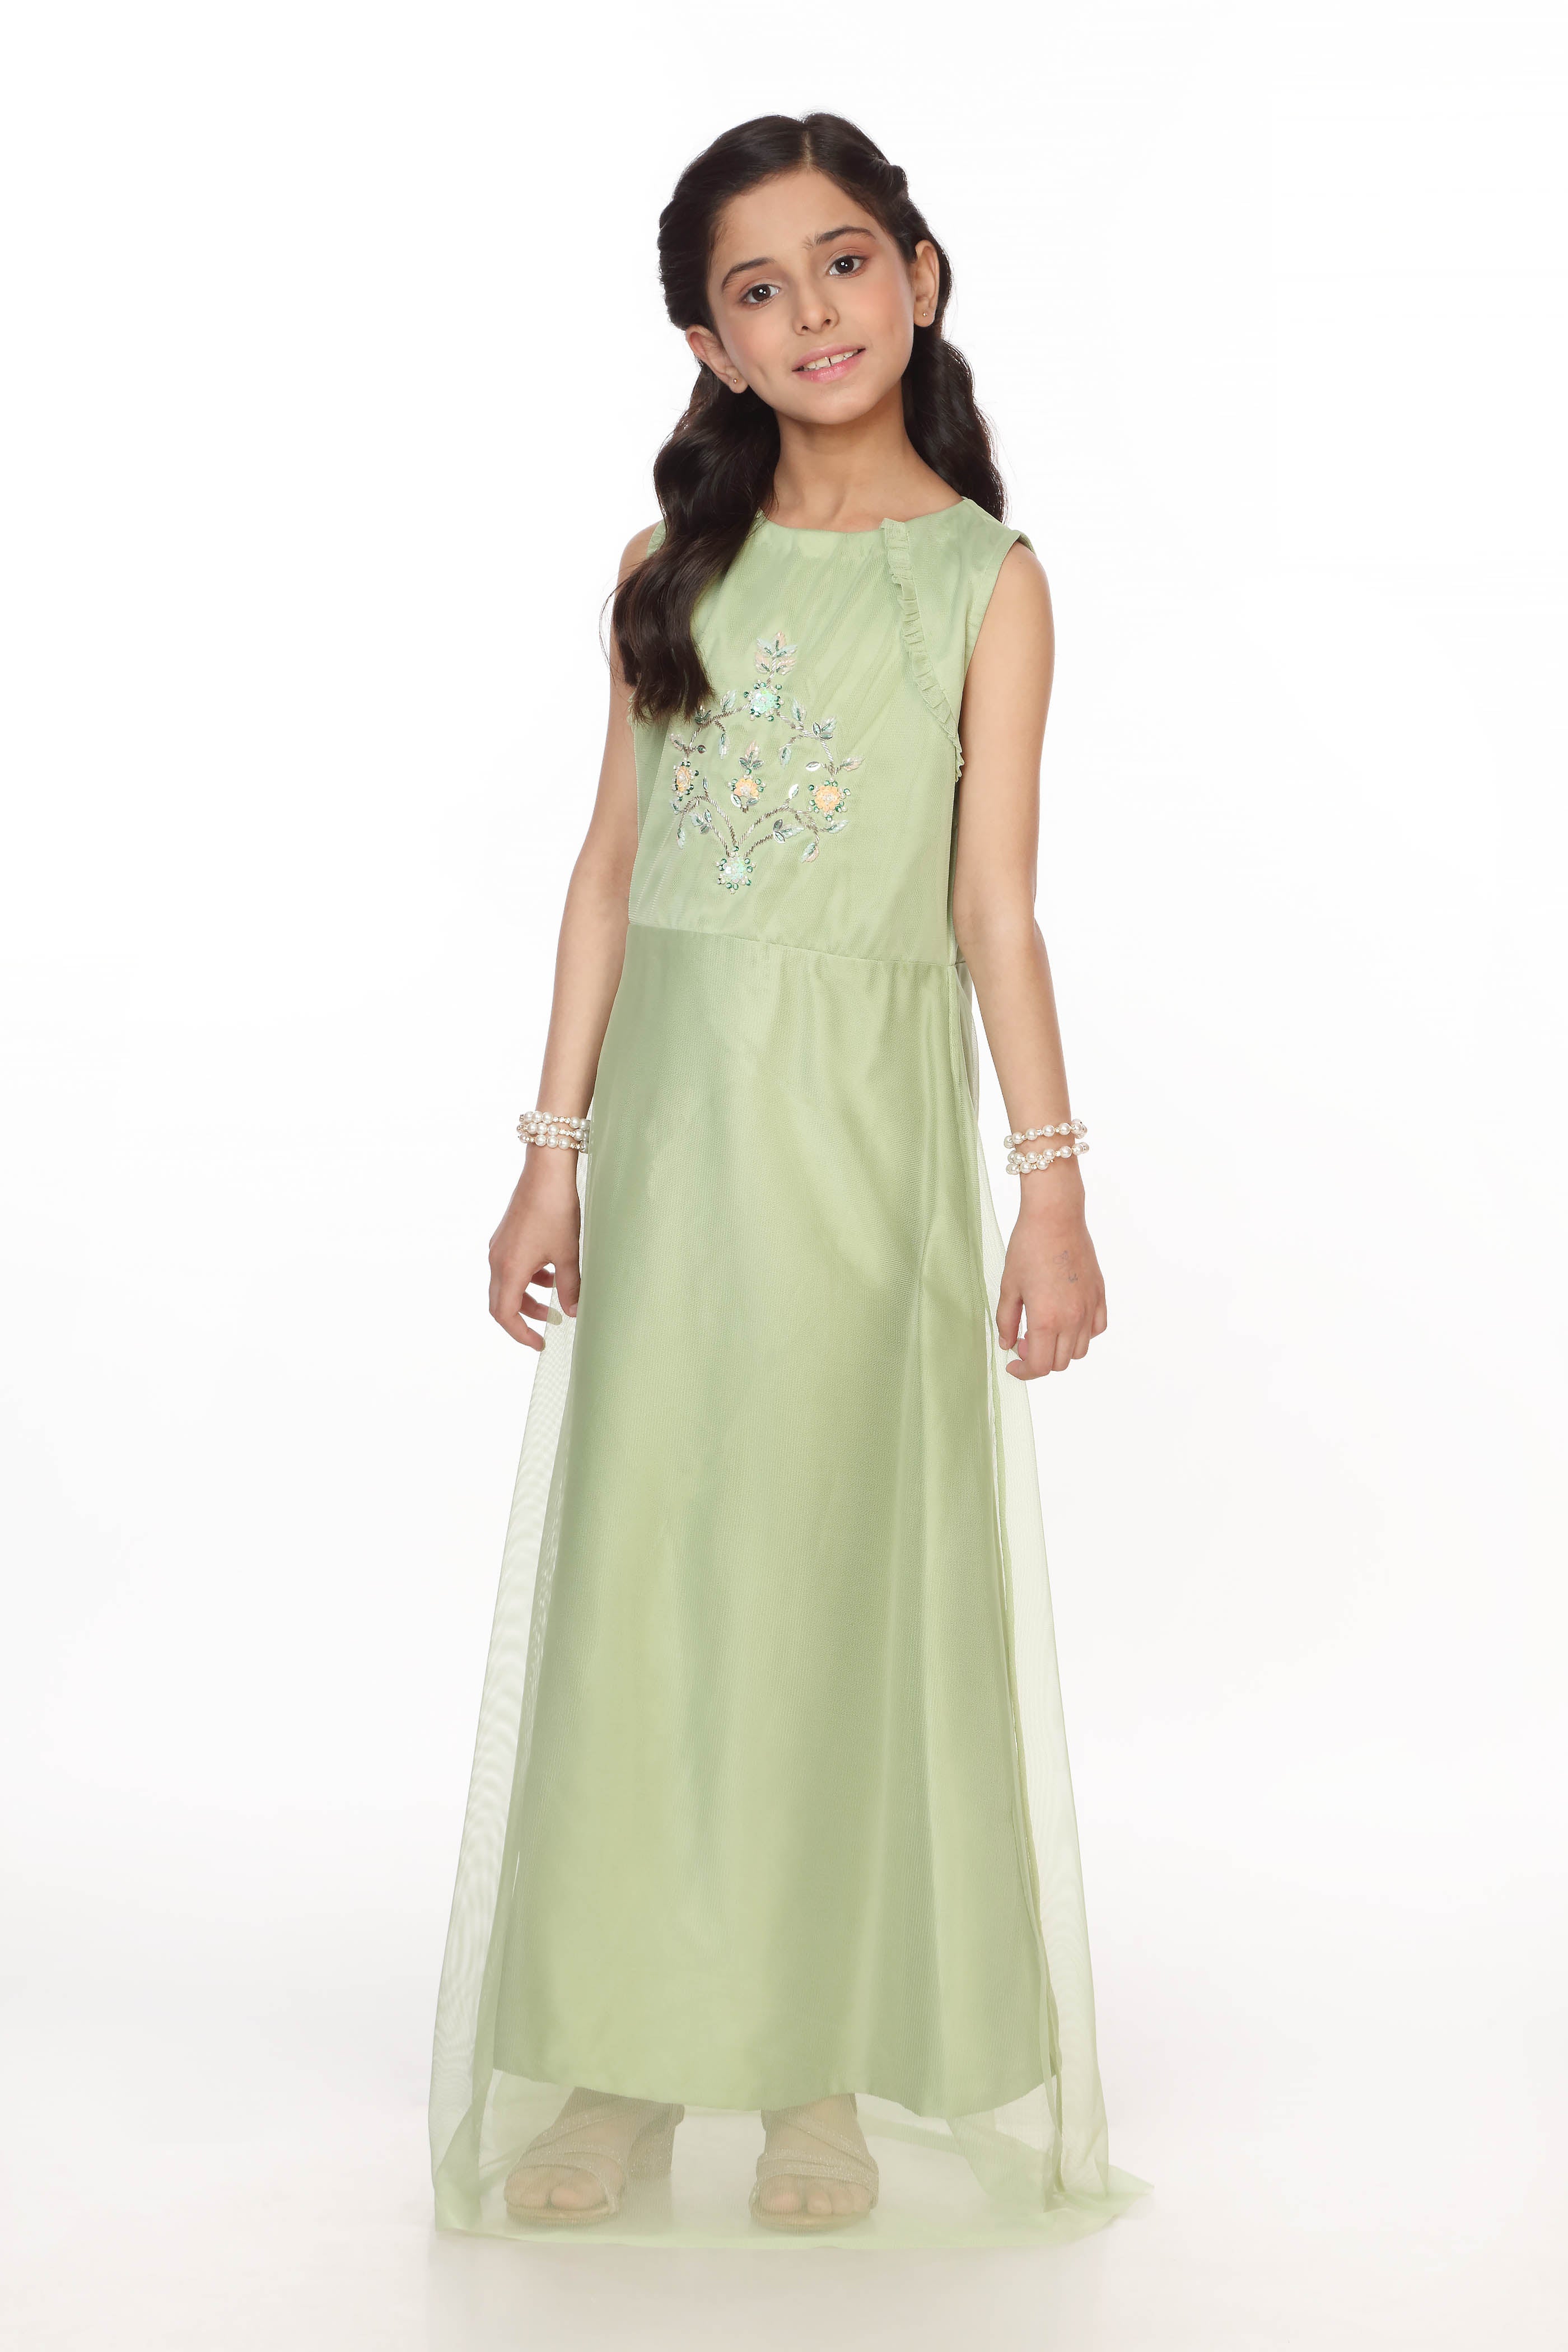 Embellished Gown (MMB-G92)